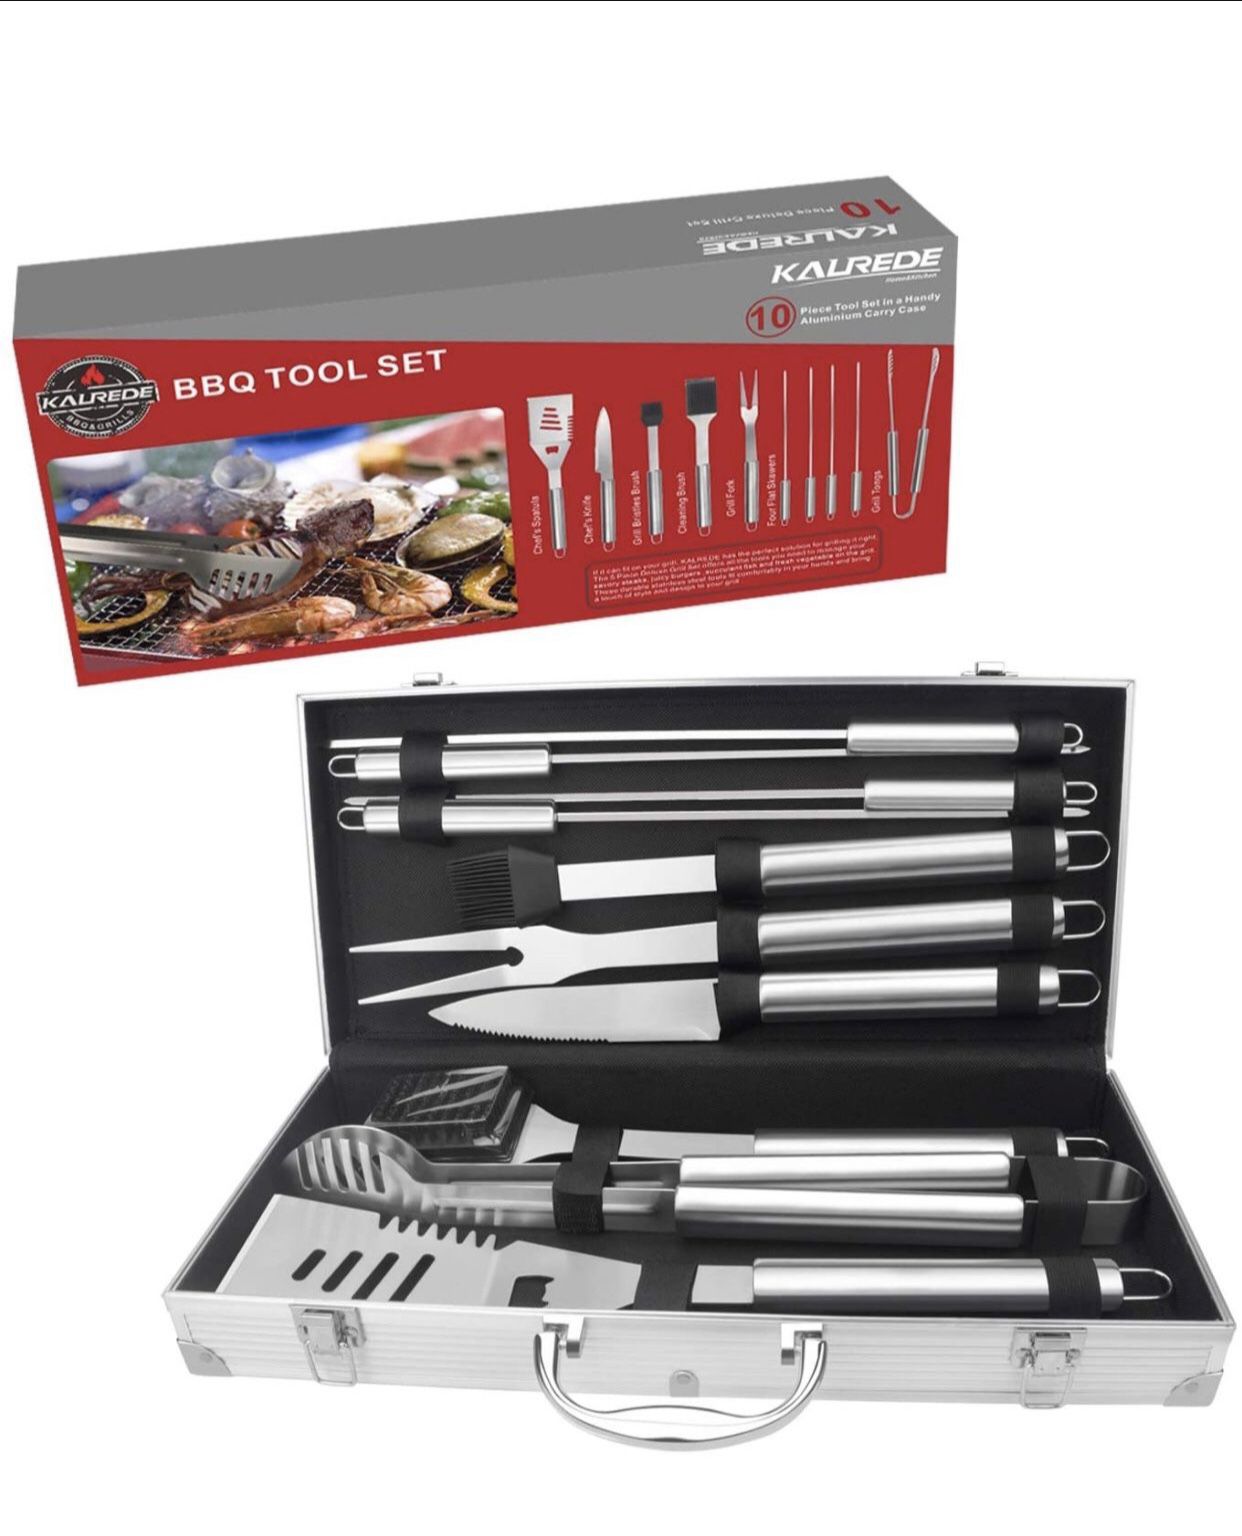 KALREDE BBQ Tools Set,10-Piece Grill Tools Set,Stainless Steel Barbecue Grilling Utensils-Include Spatula,Tongs,Meat Fork,Cleaning Brush and Silicone 